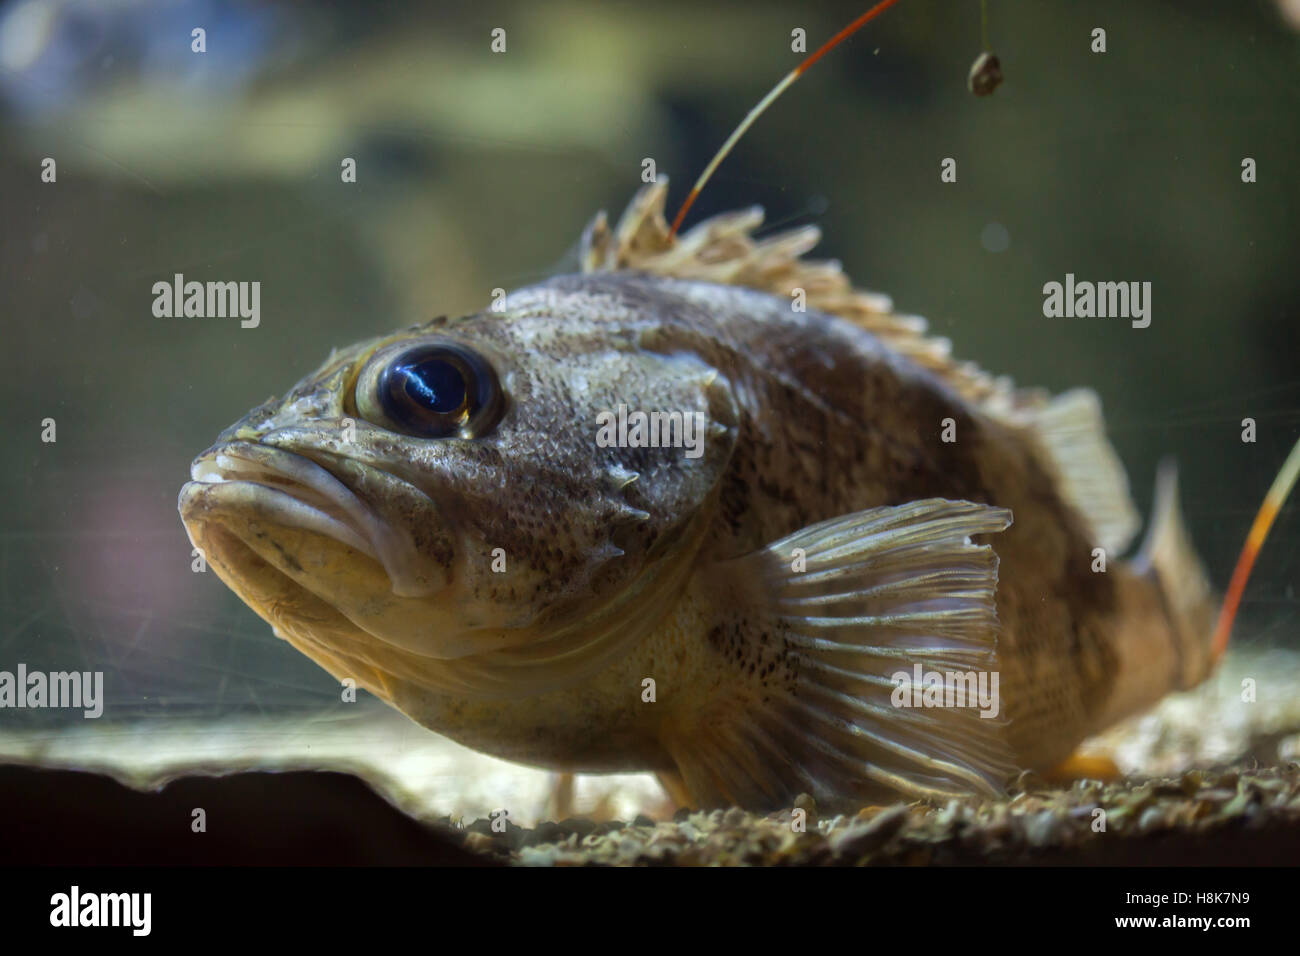 Blackbelly rosefish (Helicolenus dactylopterus), also known as the bluemouth rockfish. Stock Photo